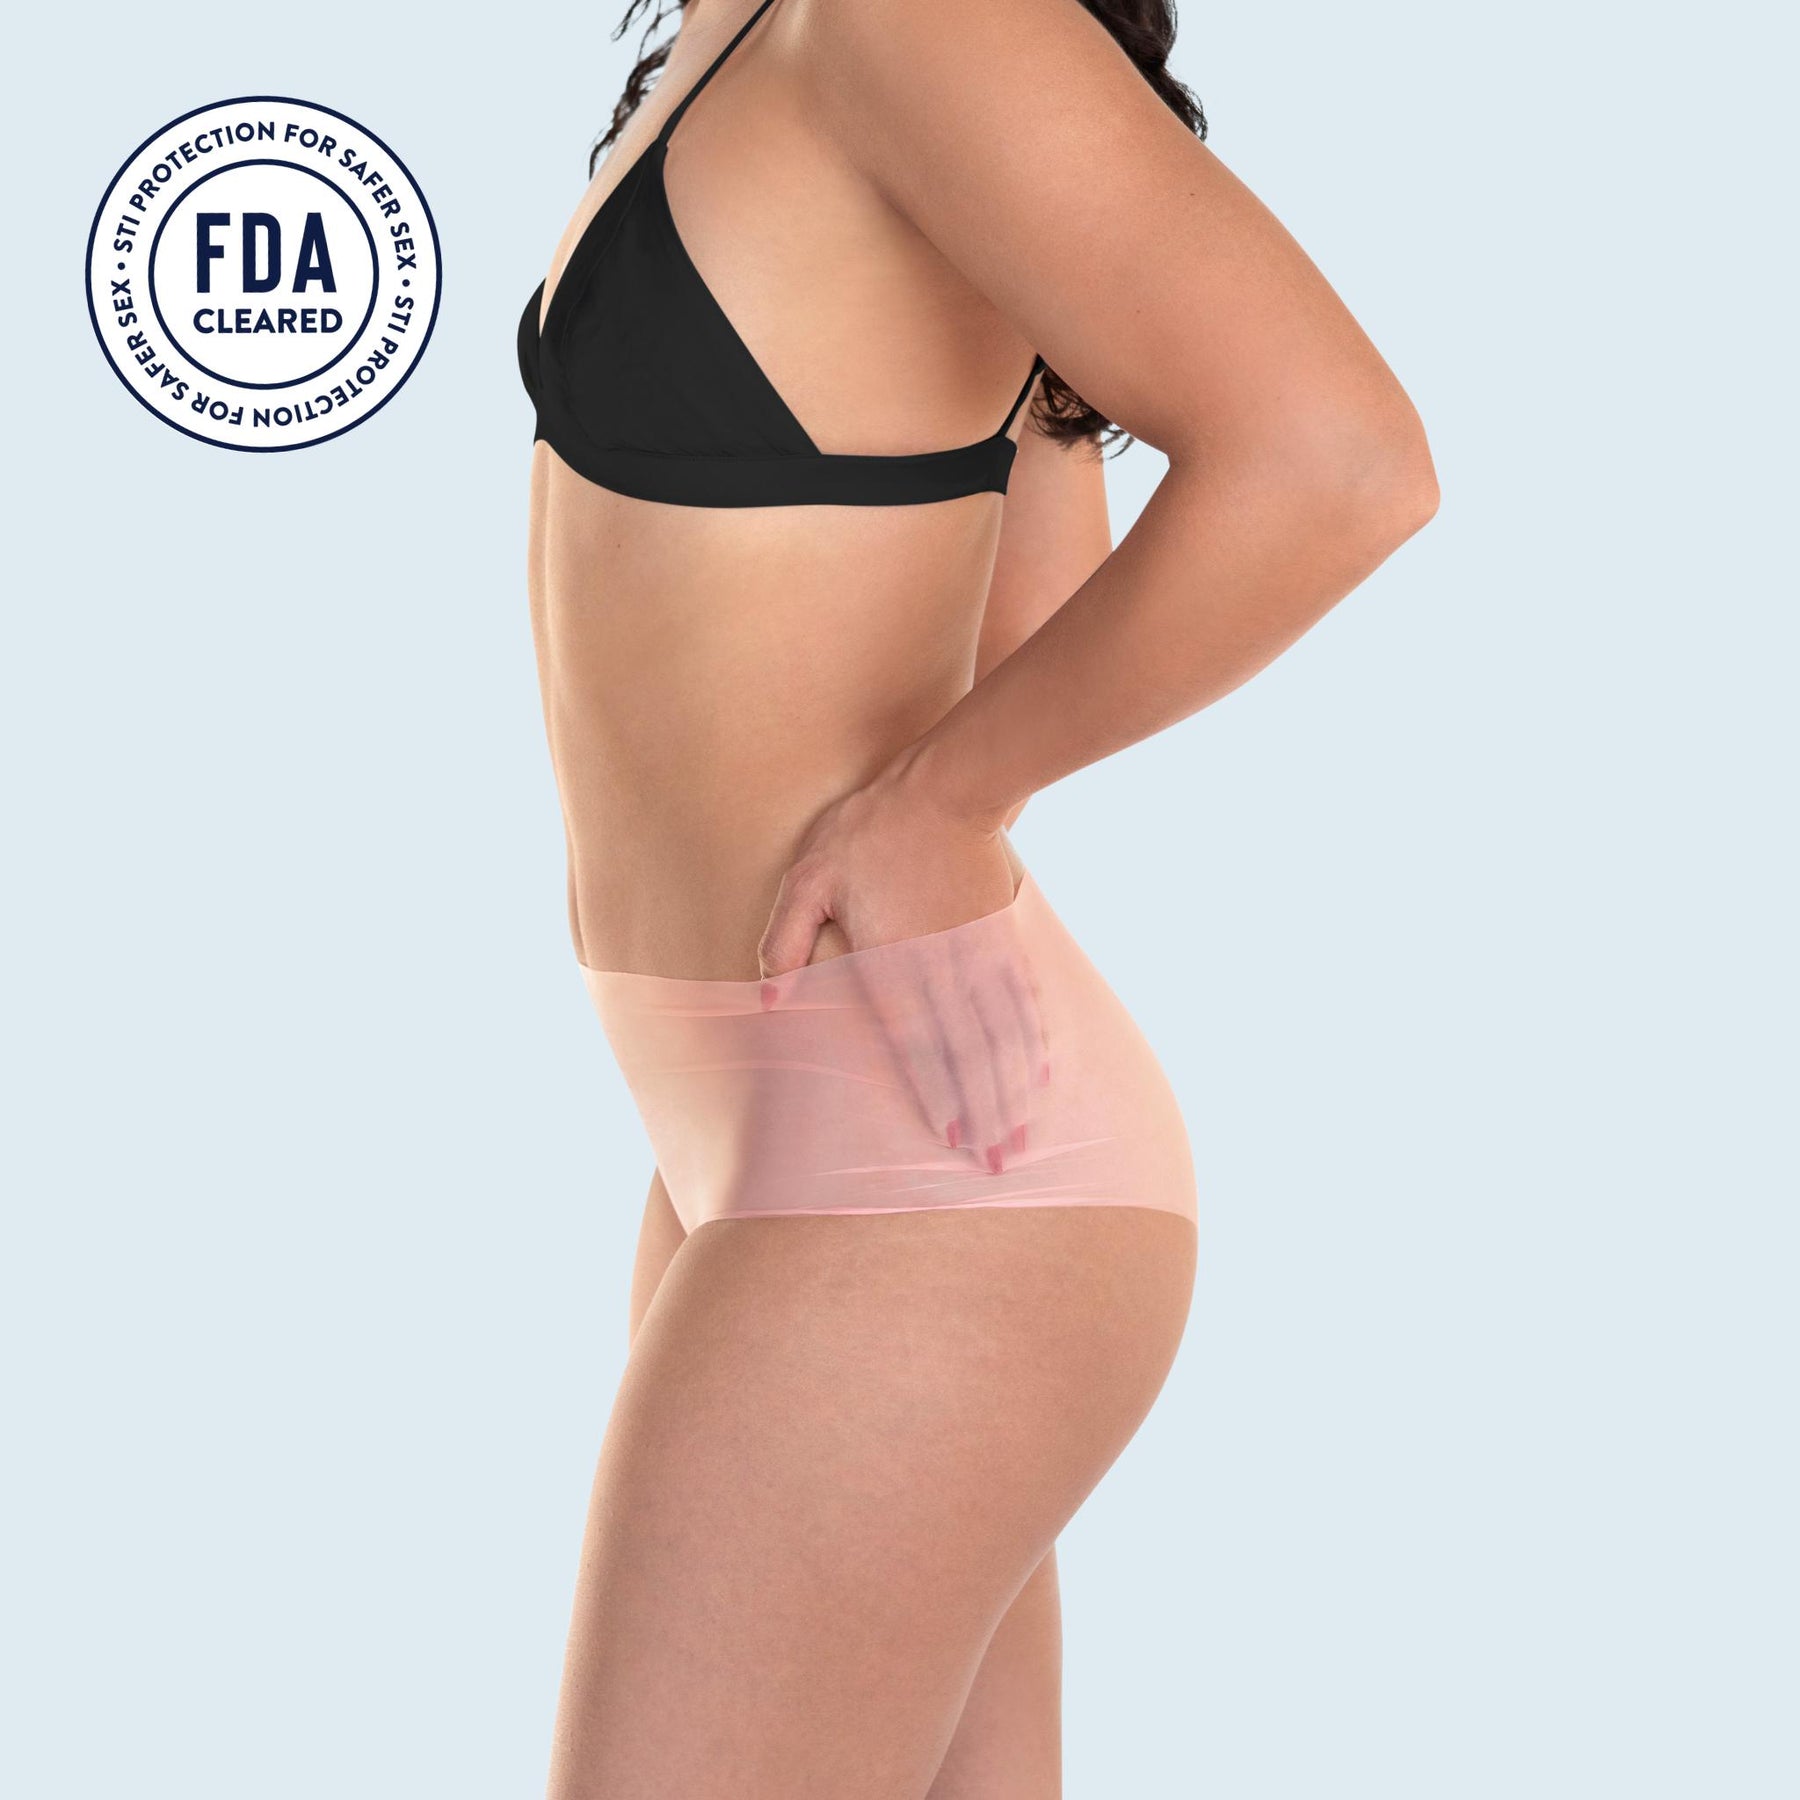 Lorals model Ahyoka demonstrates the profile view and transparent material of STI Protection Undies in Sheer Peach Shortie Style